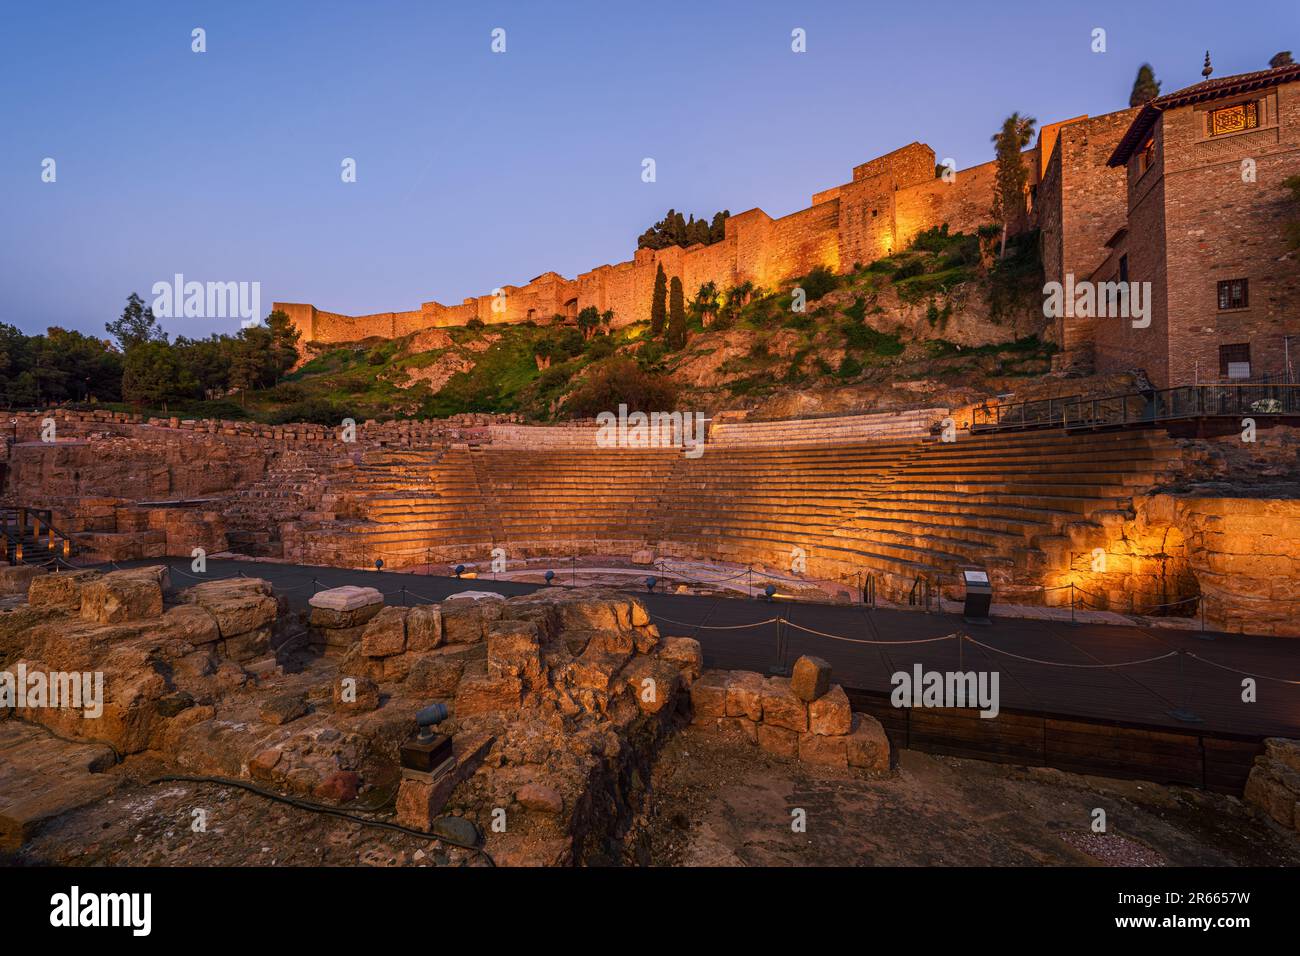 Alcazaba, the fortress palace (citadel) with ruins of roman theater in foreground, Malaga, Spain. Stock Photo